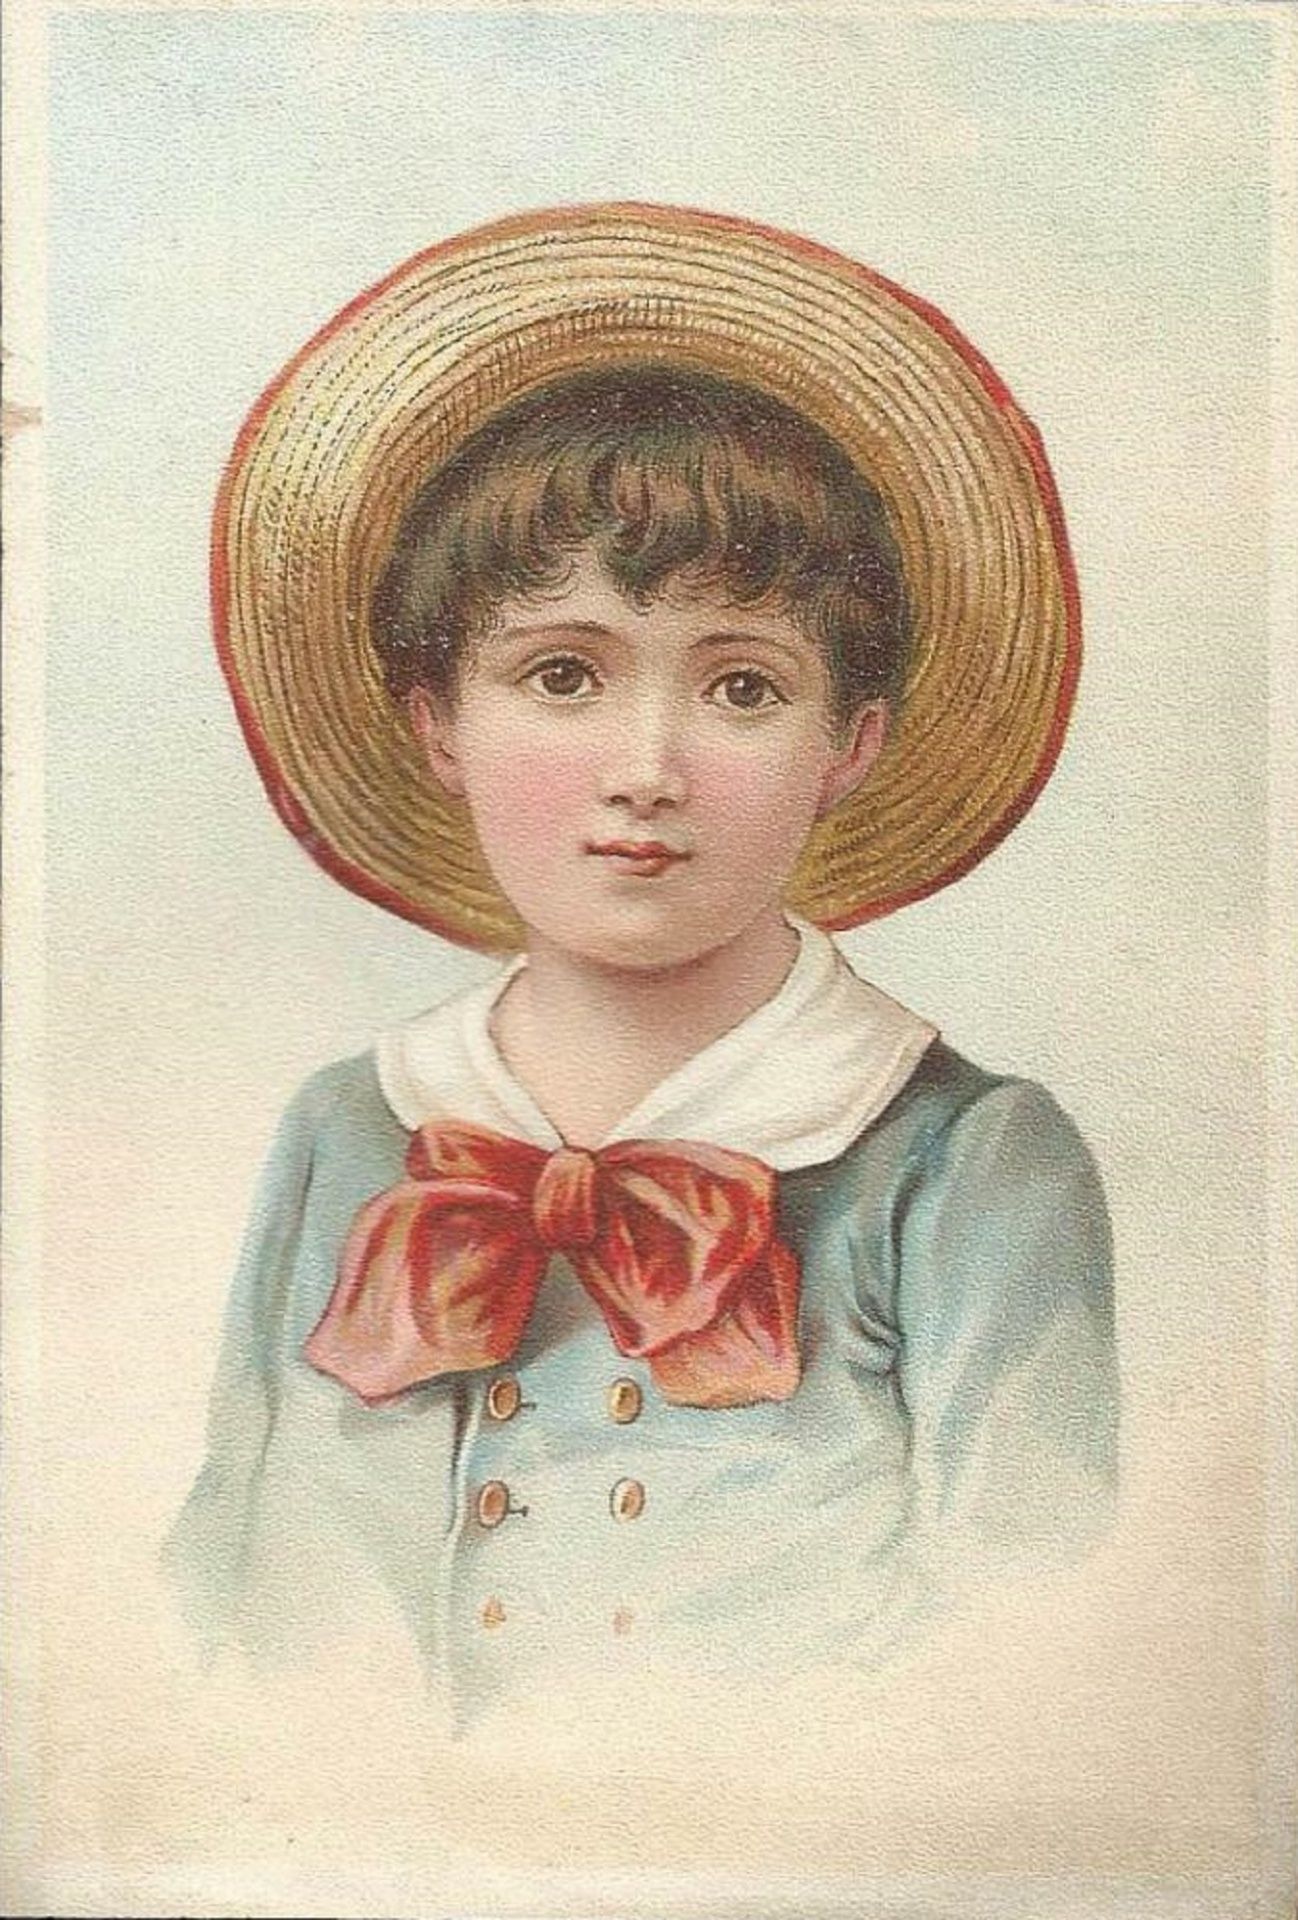 child-with-hat-1914-free-stock-photo-public-domain-pictures